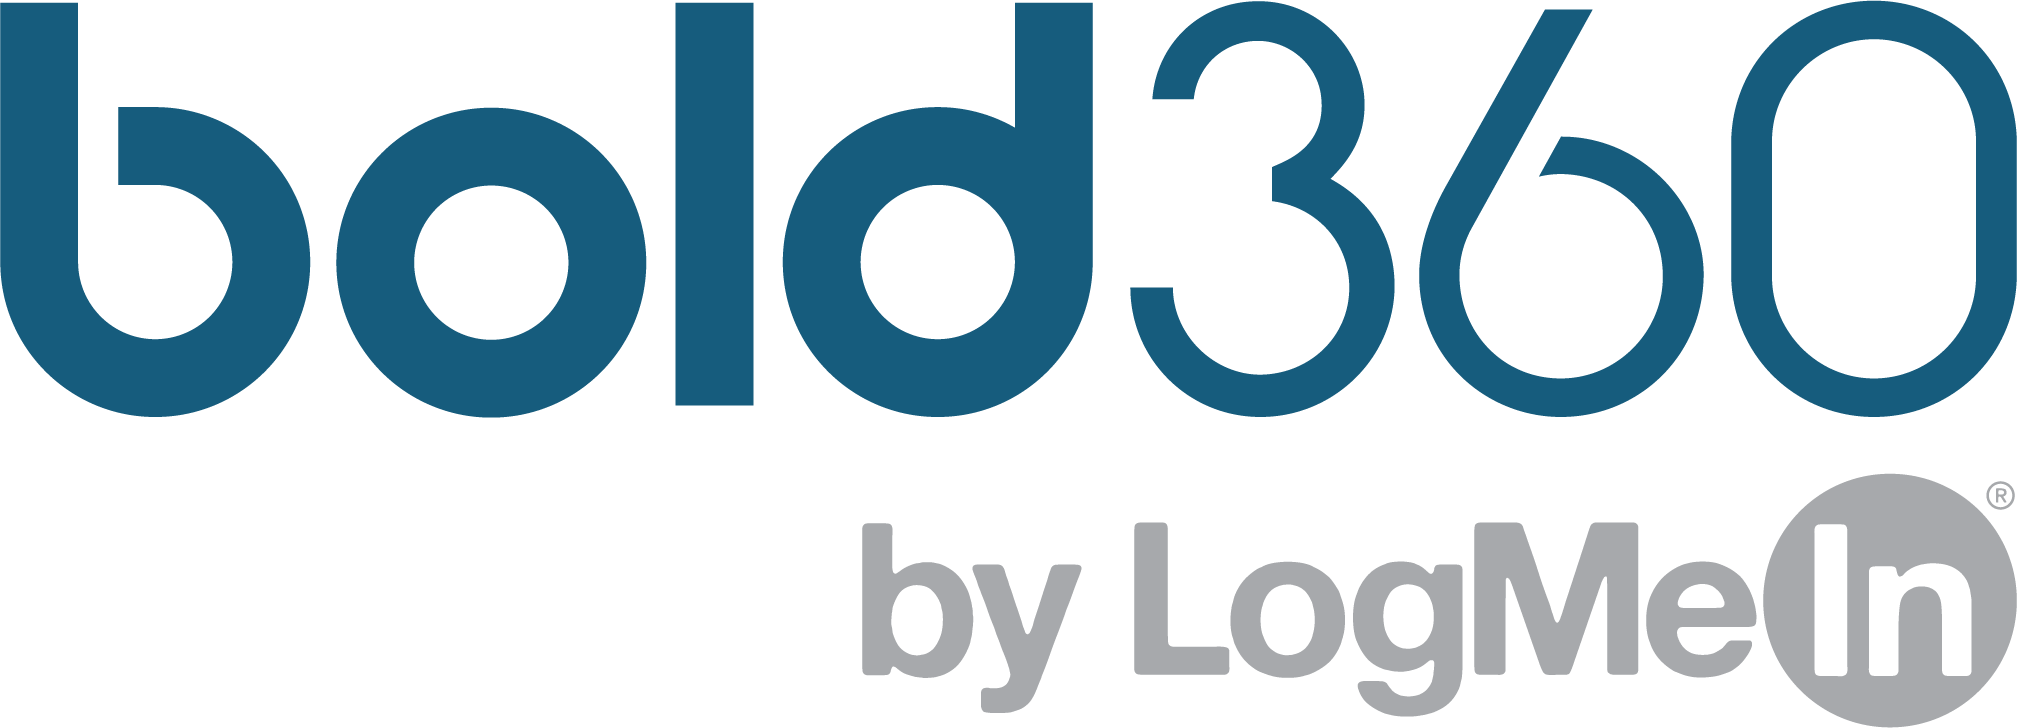 LMI Bold360 HEX - The Impact of Chatbots and AI on the Customer Journey